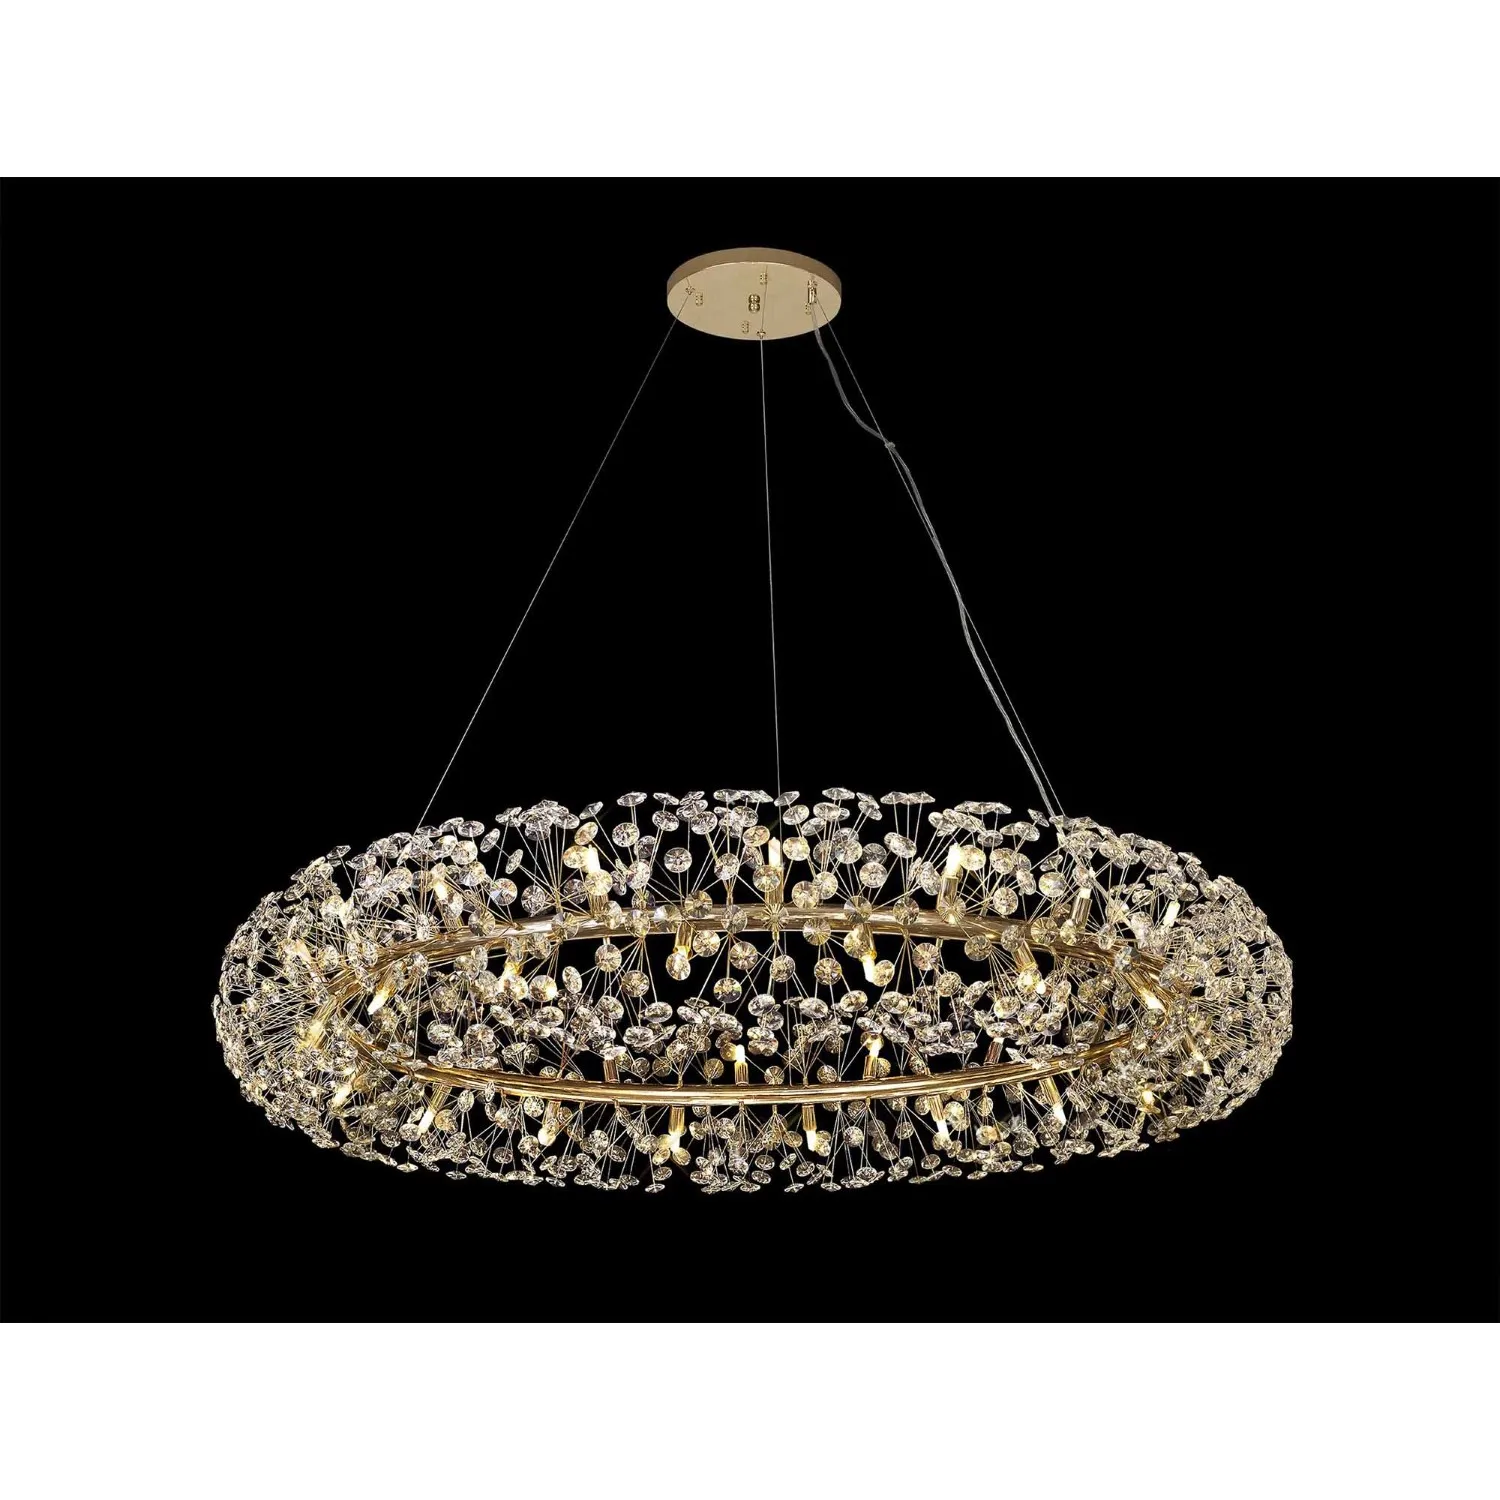 Camden Pendant 1.4m Ring 36 Light G9 French Gold Crystal, Item Weight:19.4kg